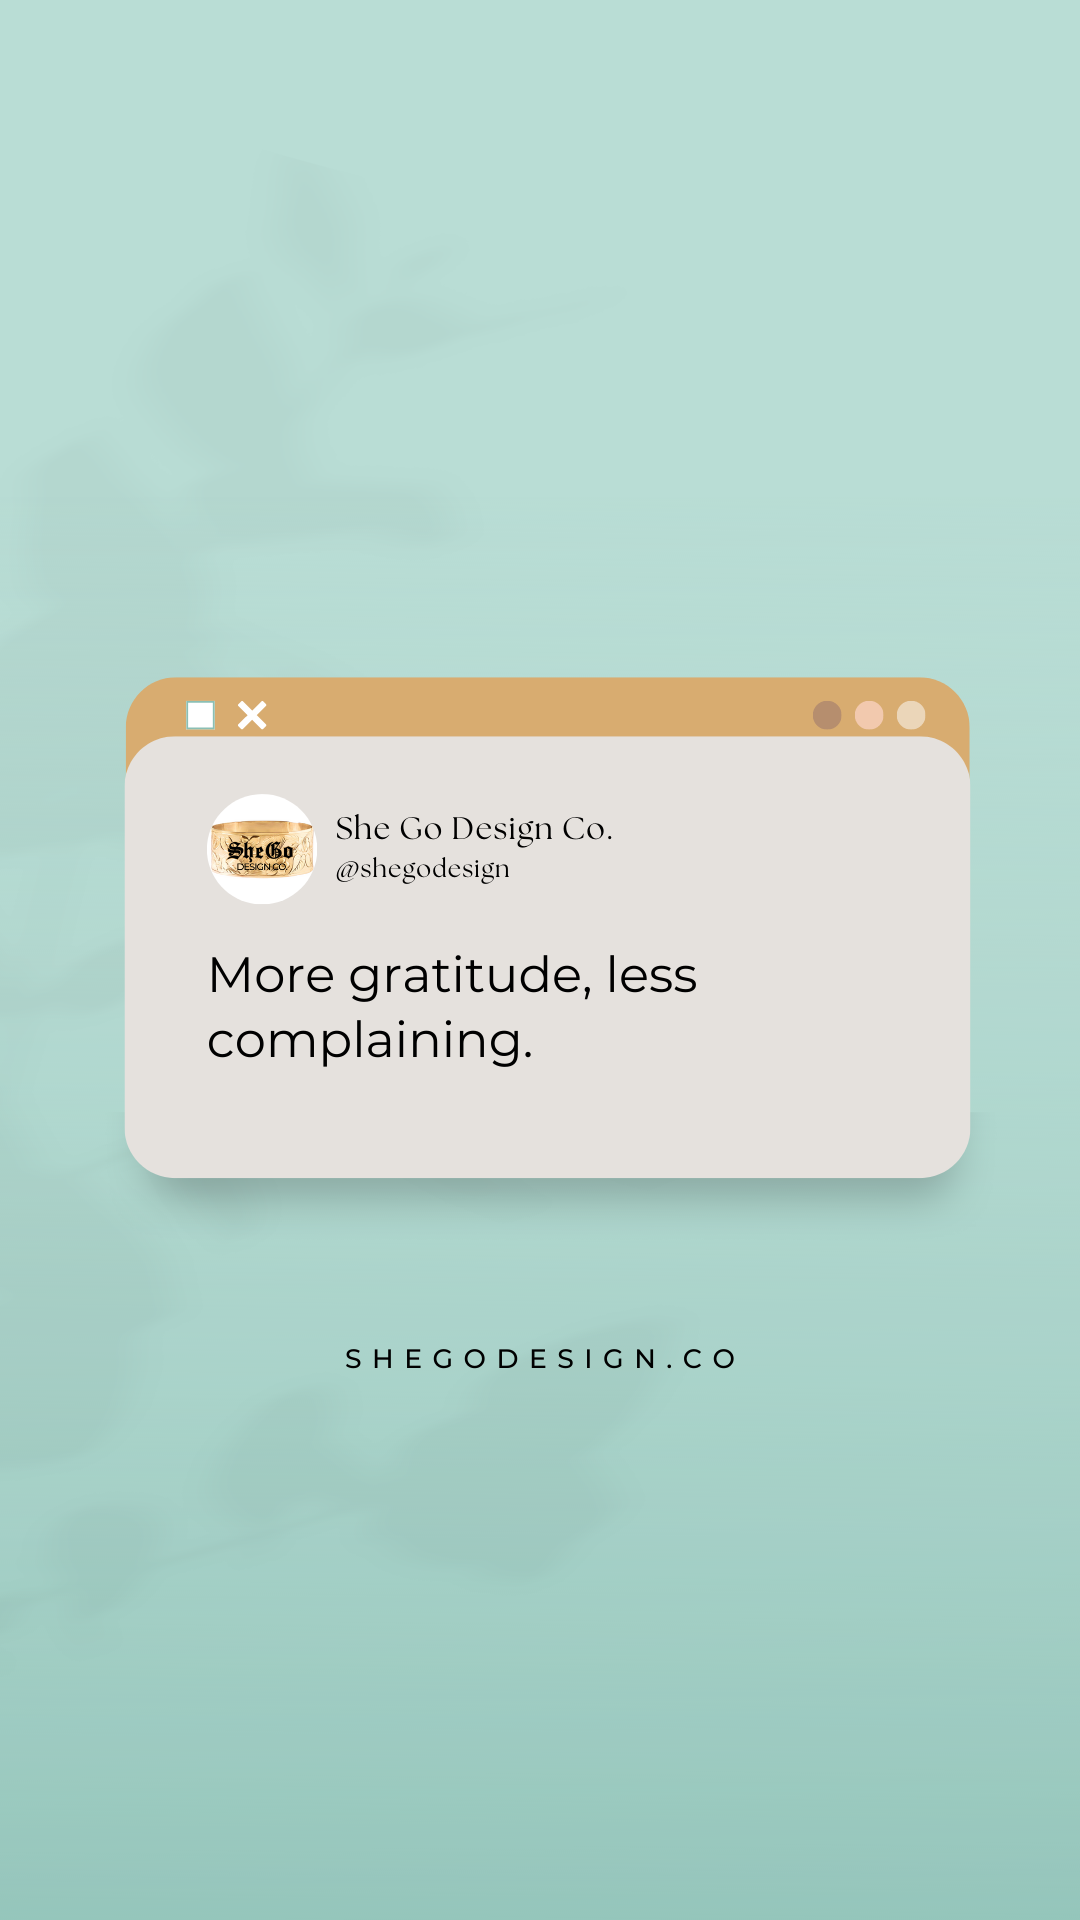 Starting your day with gratitude